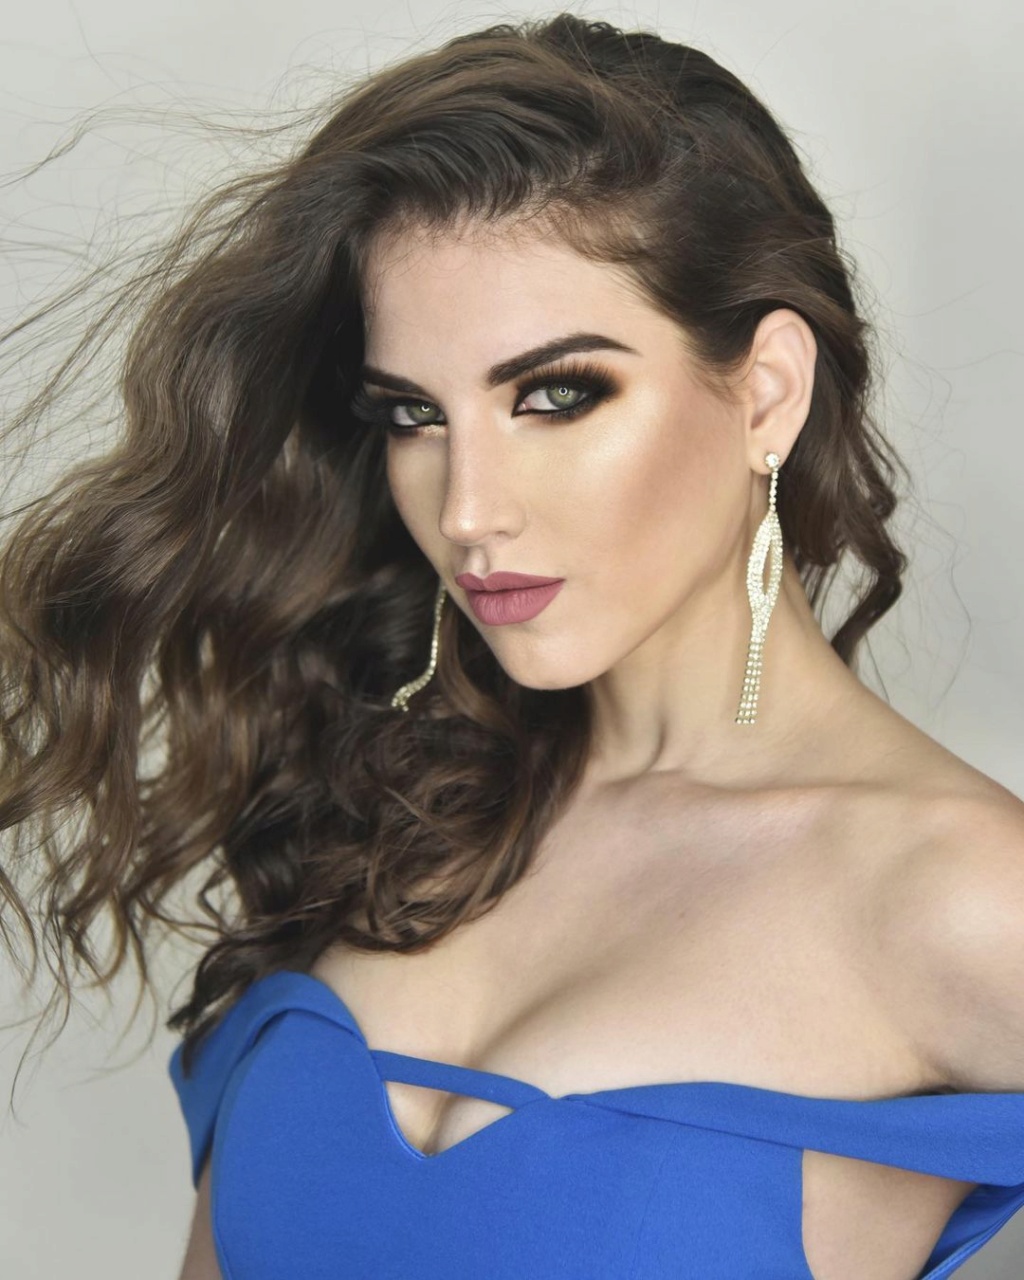 ♔♔♔♔♔ ROAD TO MISS INTERNATIONAL 2022 ♔♔♔♔♔ - Page 2 14599210